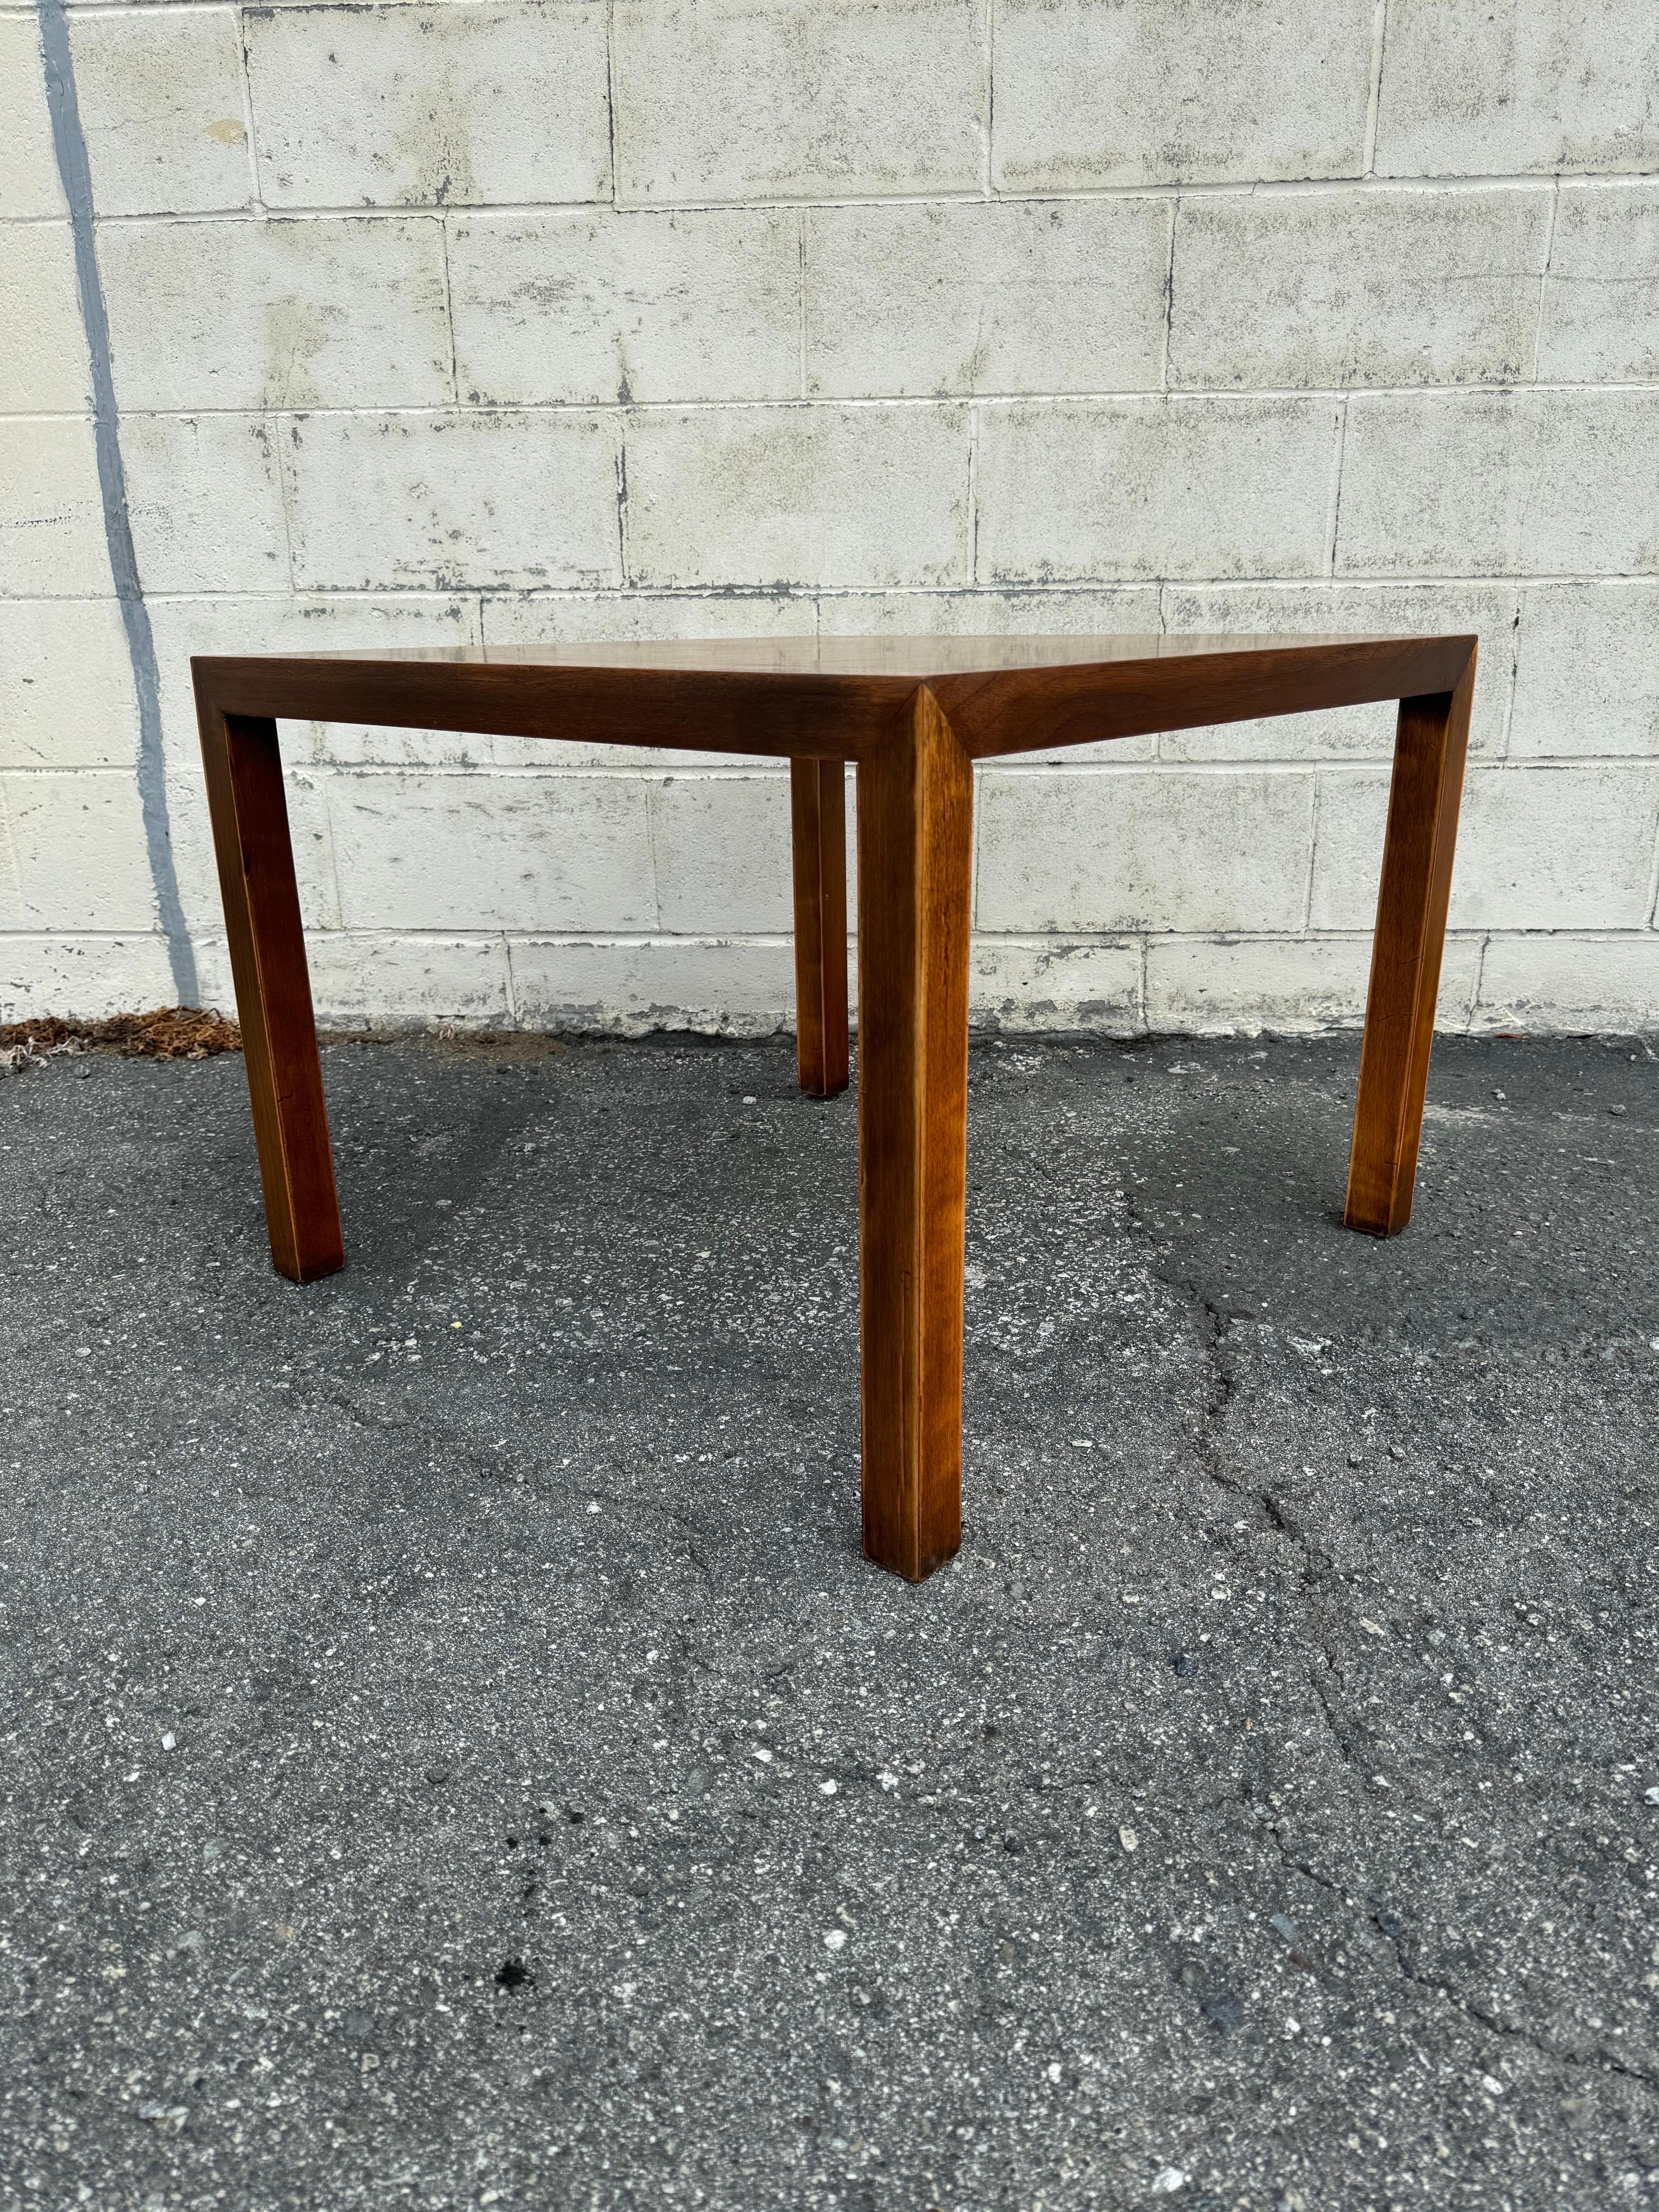 Cool piece of 1960's American mid century modern furniture. Made By Lane Furniture in Alta Vista, Virginia. This coffee table is marked on the bottom with 